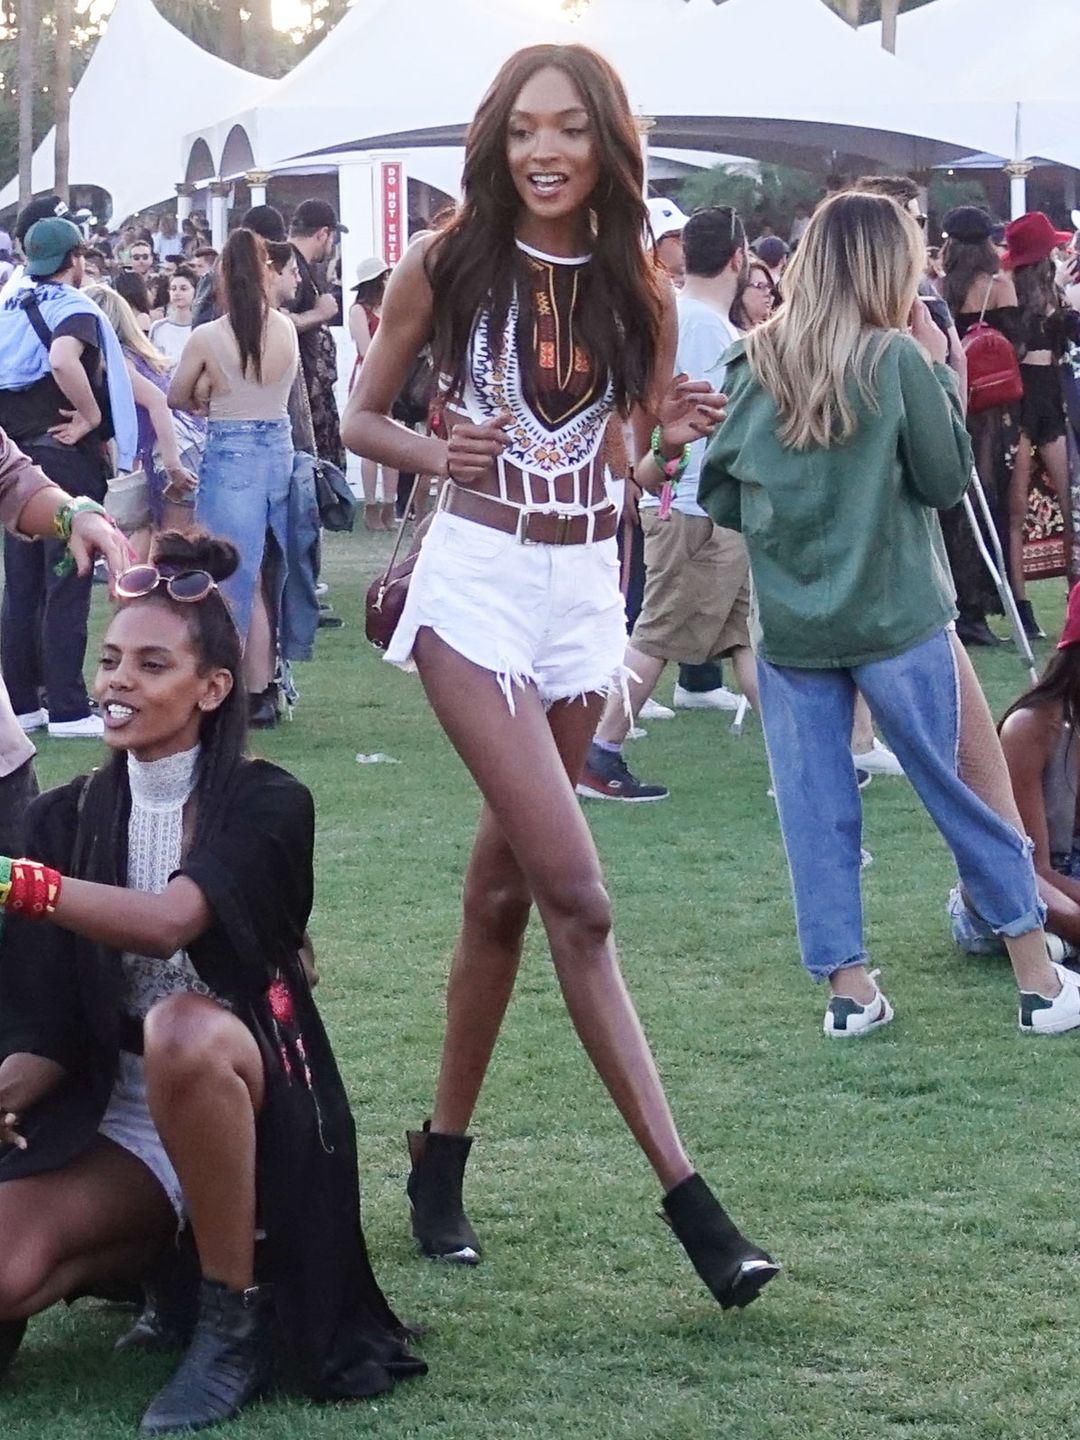 INDIO, CA - APRIL 15:  Model Jourdan Dunn is seen at Coachella on April 15, 2017 in Indio, CA.  (Photo by Hollywood To You/Star Max/GC Images)